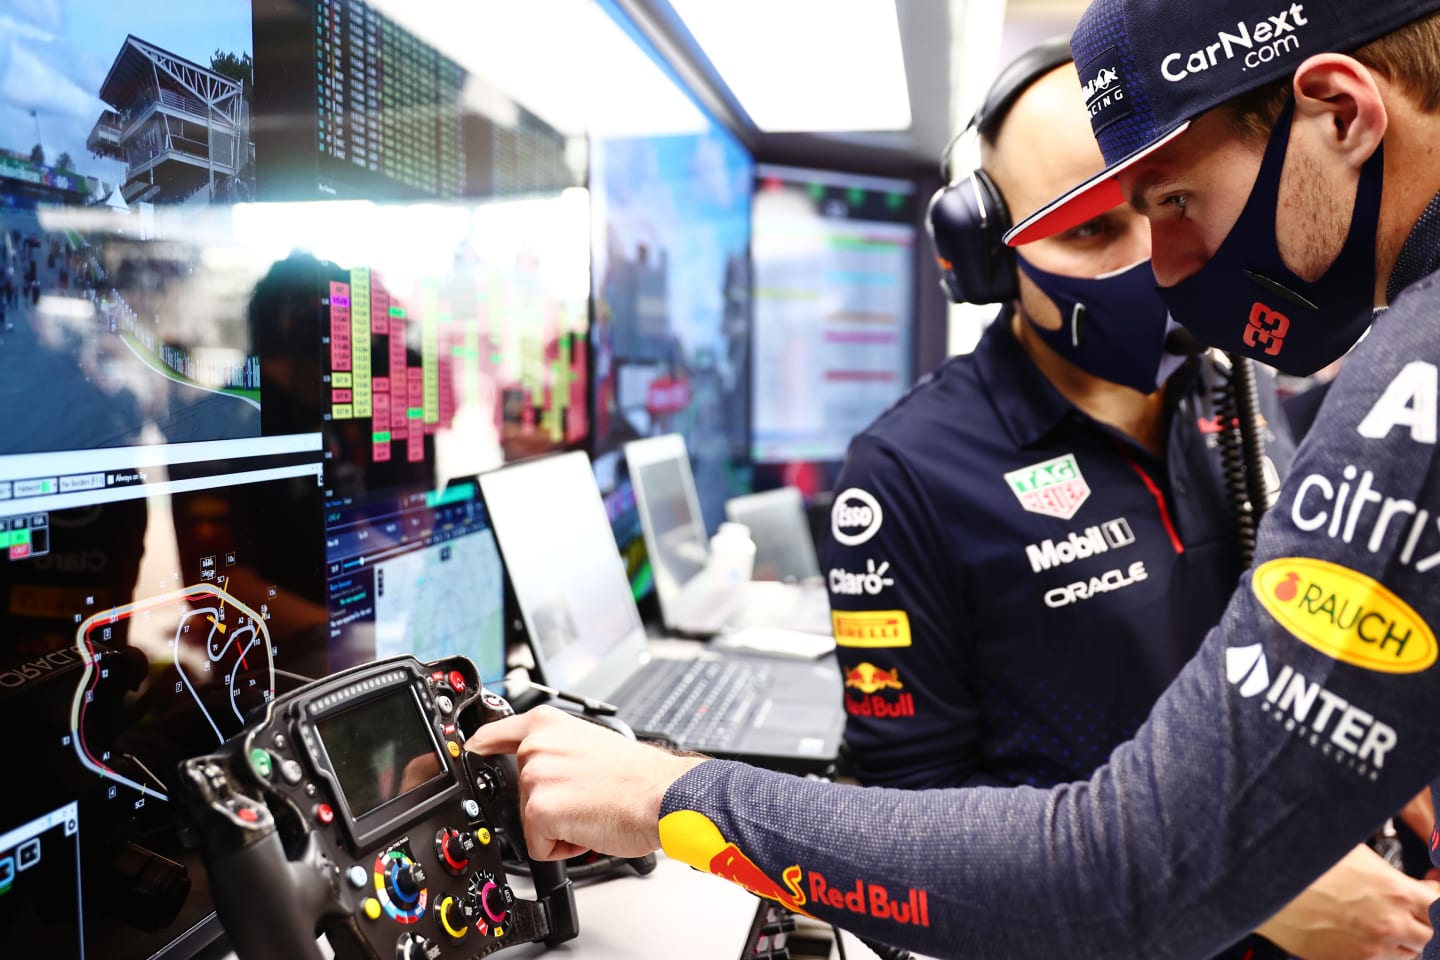 SAO PAULO, BRAZIL - NOVEMBER 13: Max Verstappen of Netherlands and Red Bull Racing talks with race engineer Gianpiero Lambiase in the garage before the sprint ahead of the F1 Grand Prix of Brazil at Autodromo Jose Carlos Pace on November 13, 2021 in Sao Paulo, Brazil. (Photo by Mark Thompson/Getty Images)